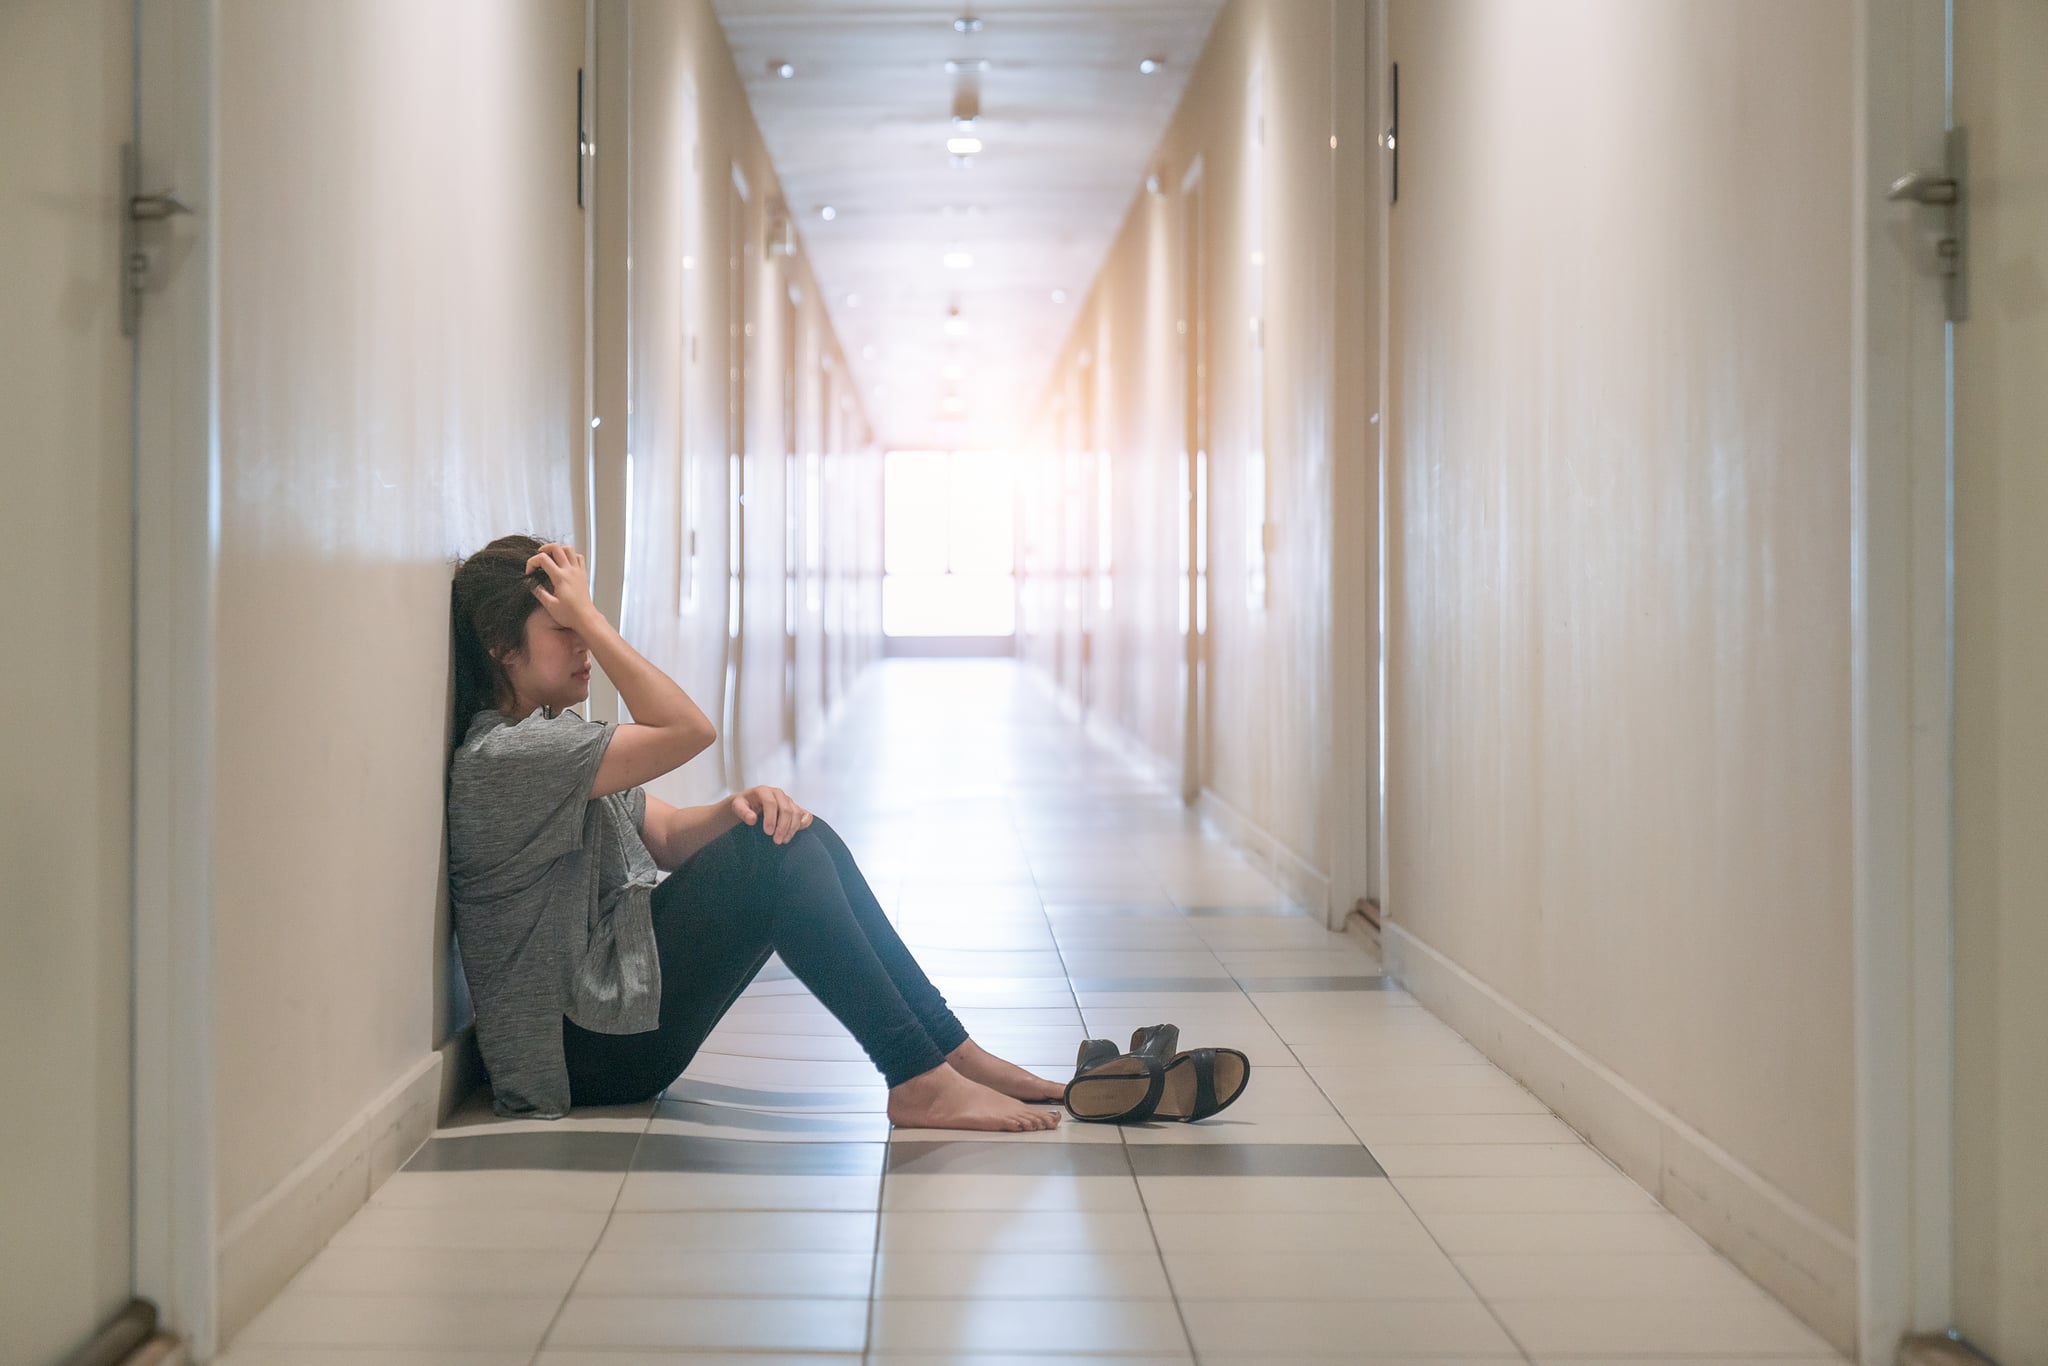 woman suffering from depression sat in the corridor and cried.